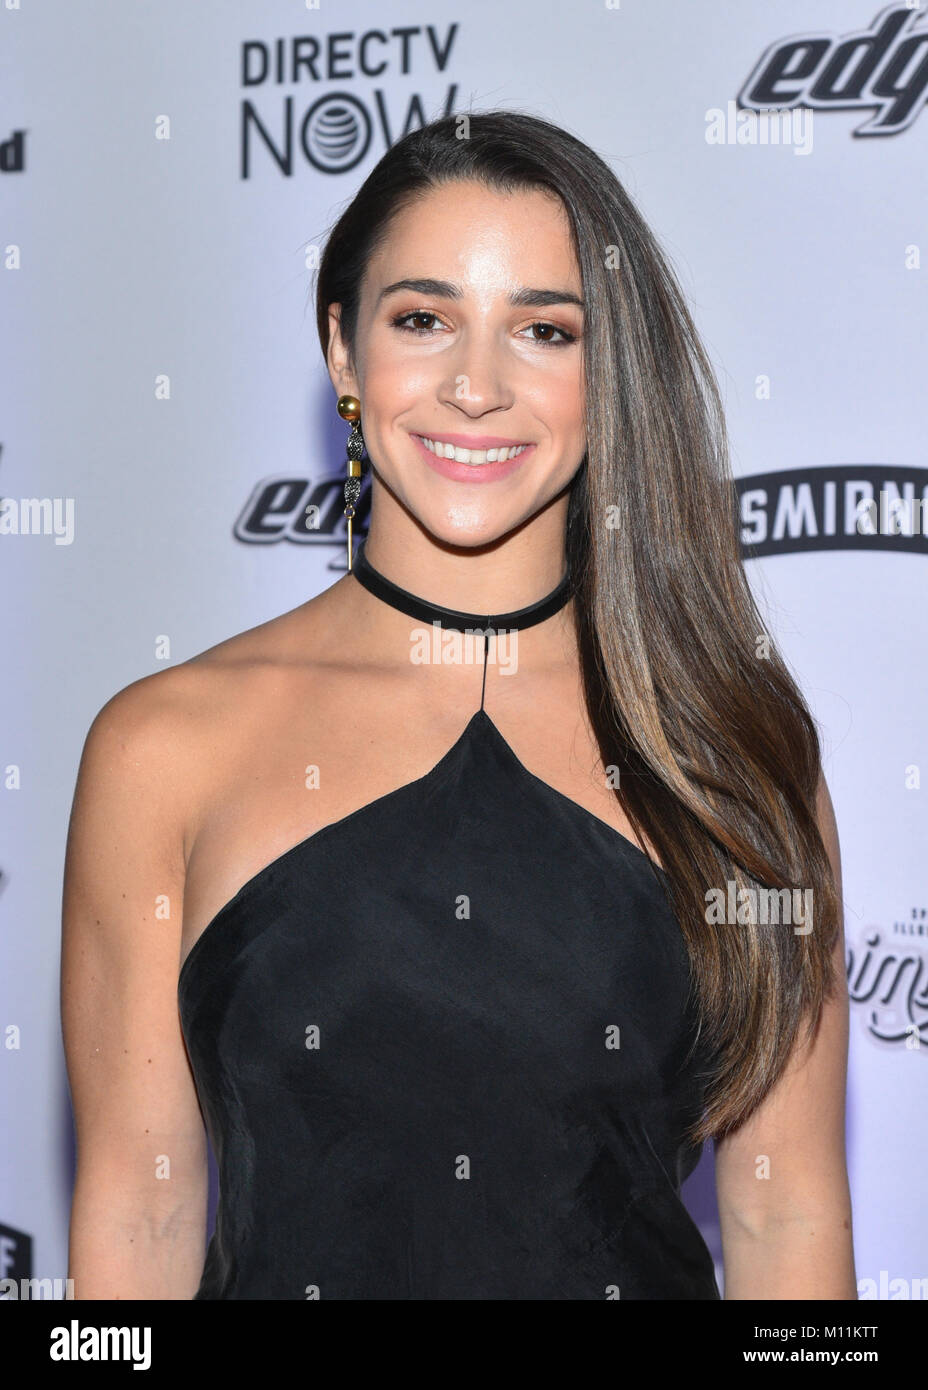 Olympian Aly Raisman besucht die Sports Illustrated Swimsuit 2017 Launch Event in der Mitte 415 Event Space am 16. Februar 2017 in New York City. Stockfoto